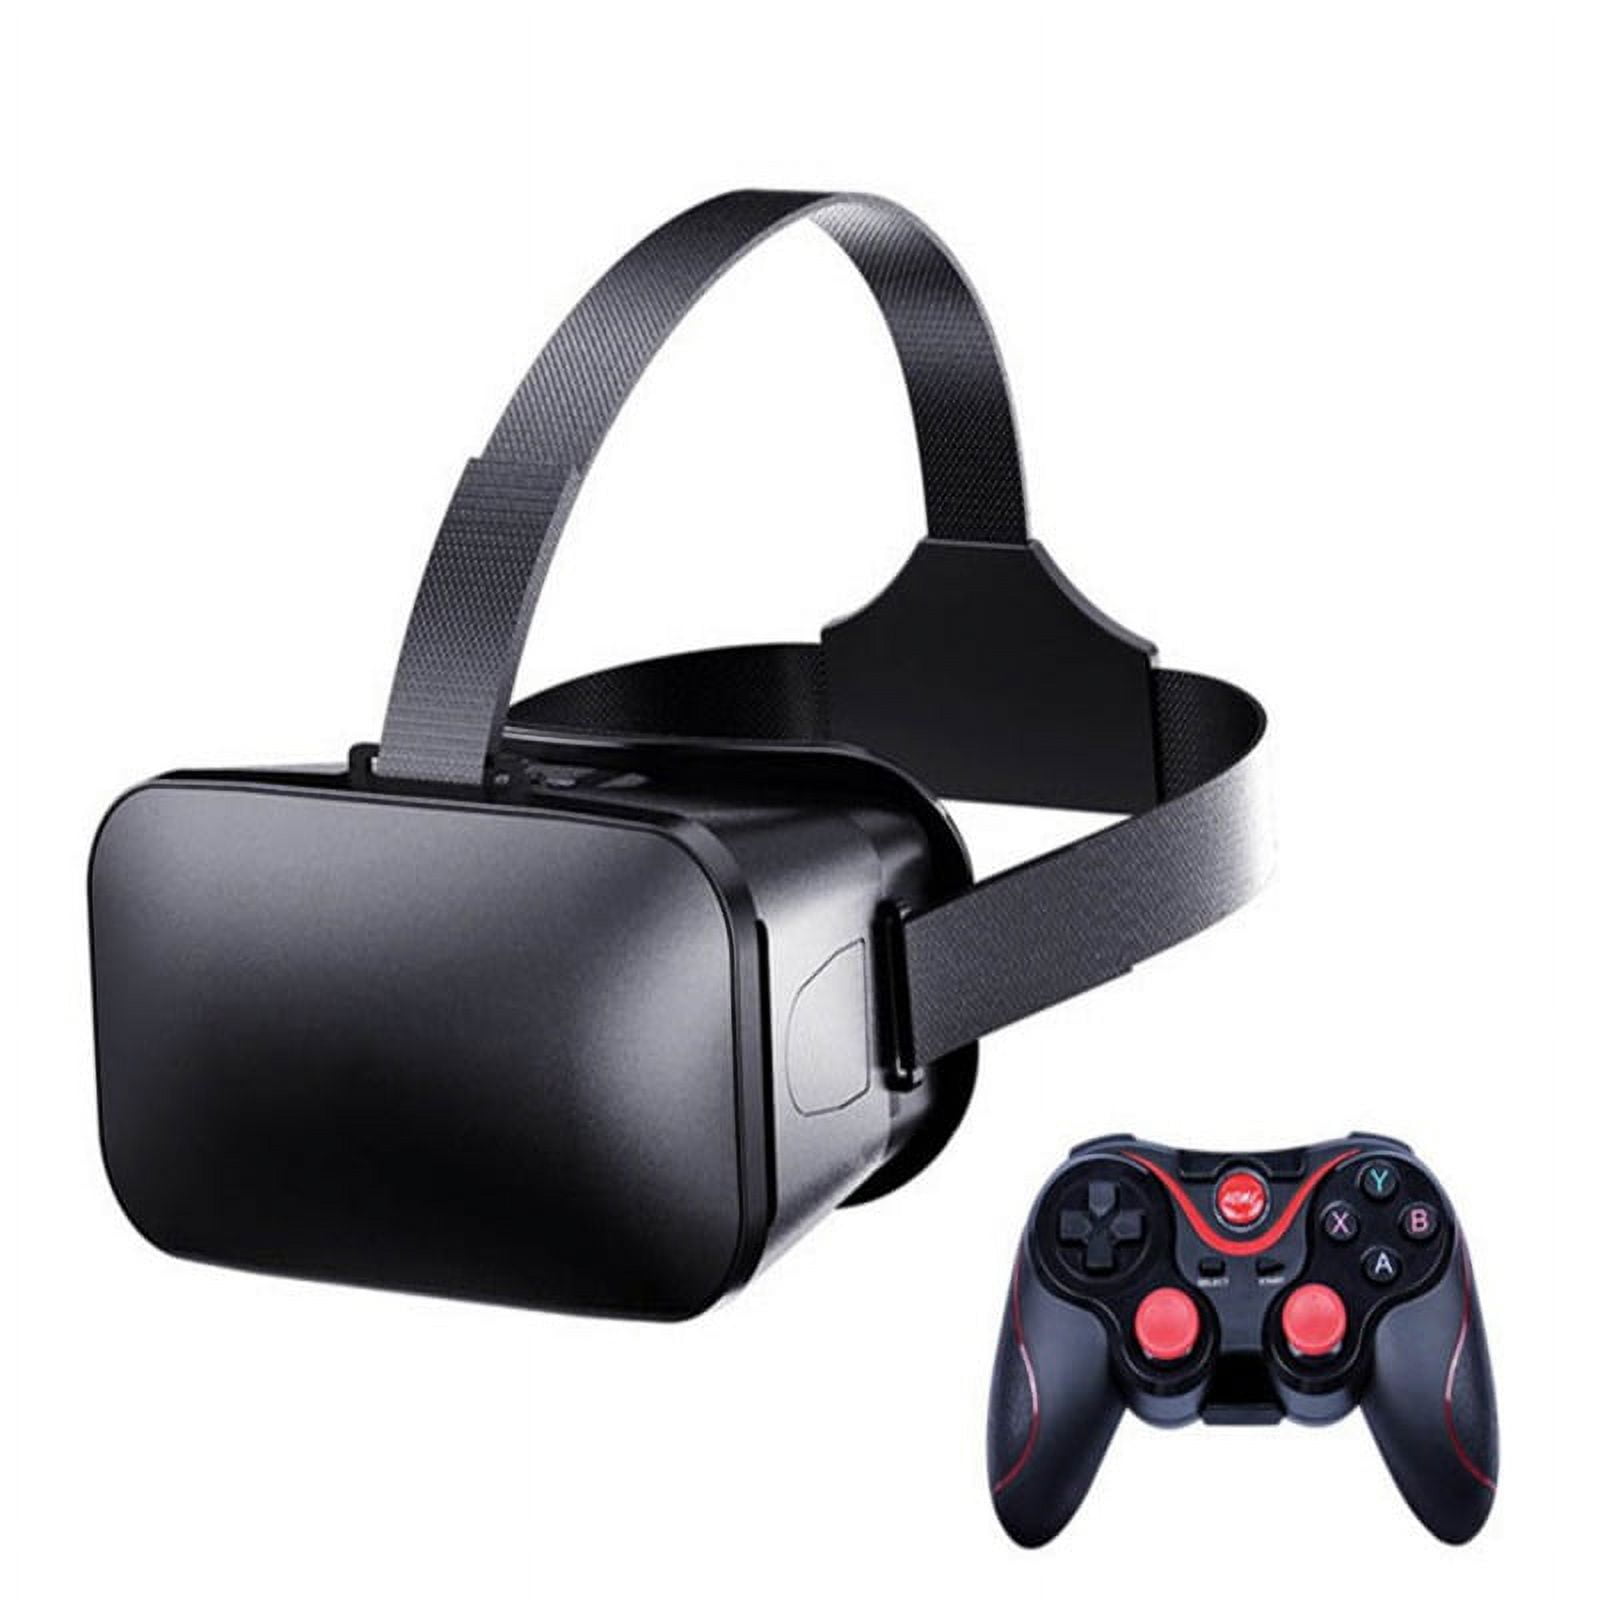 VR Headset Compatible with iPhone & Android Phone - VR Headset for Phone -  Universal Virtual Reality Goggles for Kids and Adults - Cell Phone VR